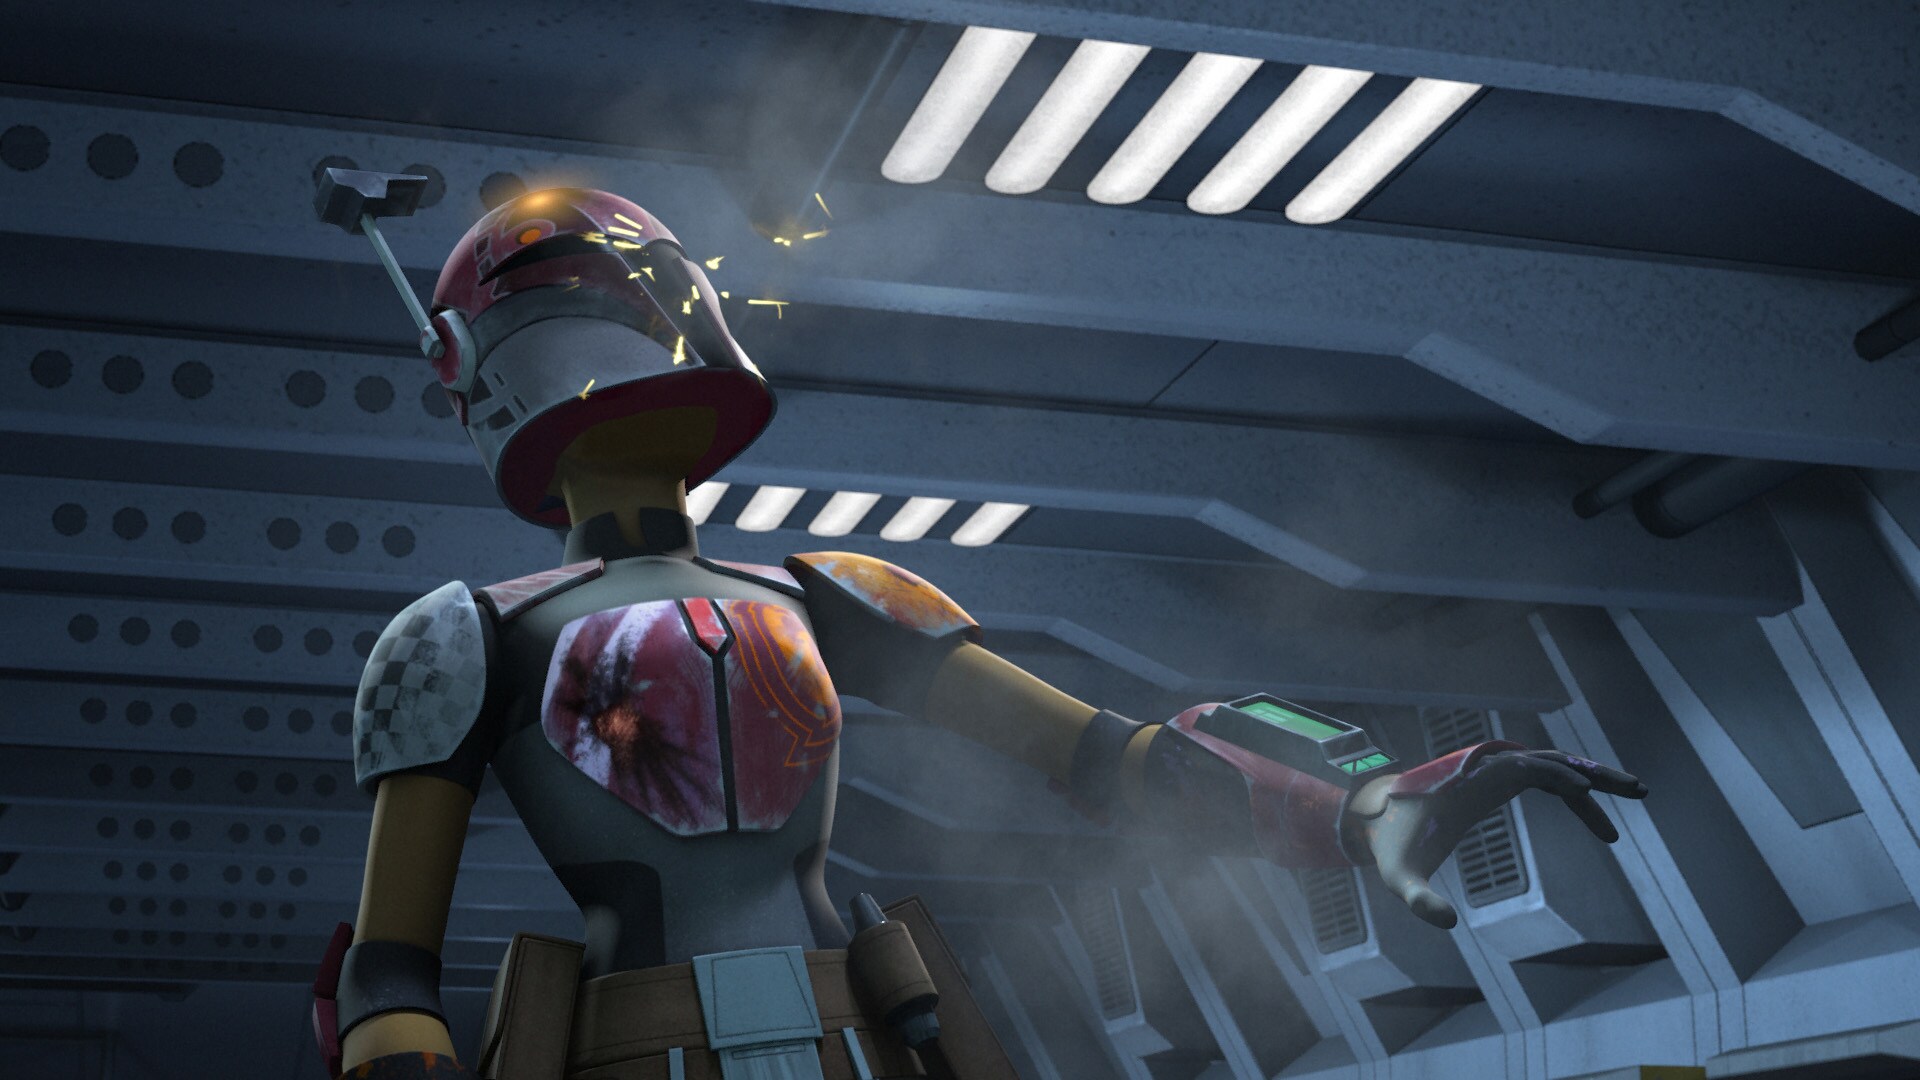 The scorch marks that Sabine sustains in battle will inspire her to repaint her armor and update ...